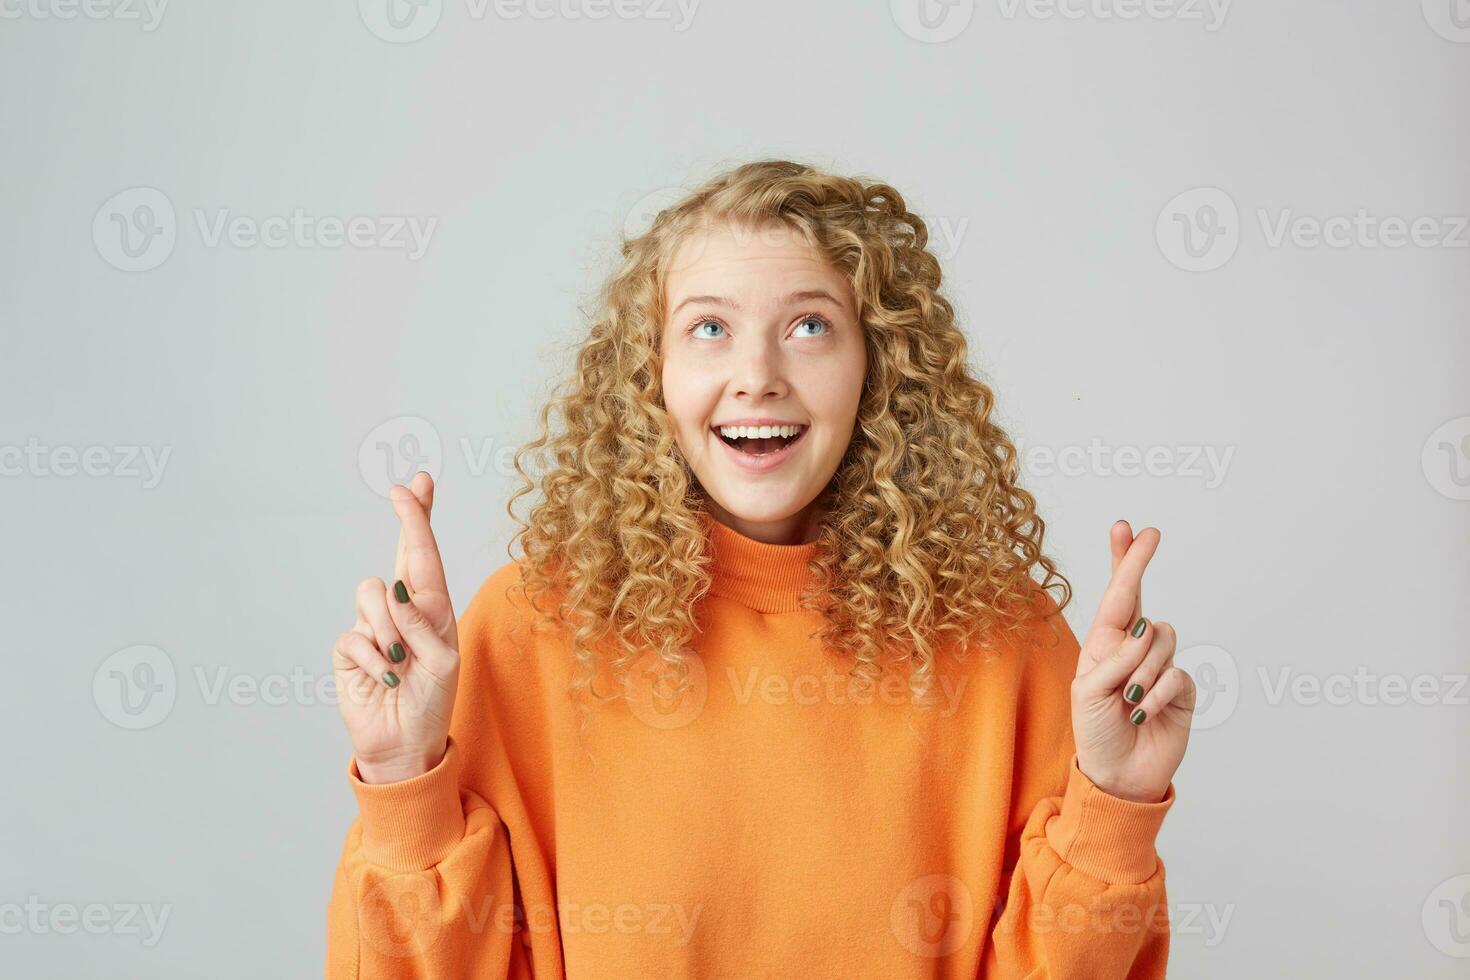 Charming positive girl sincerely believing in her luck. Shot of young curly happy smiling inspired blonde female keeping her fingers crossed and eyes looking up while making a wish photo